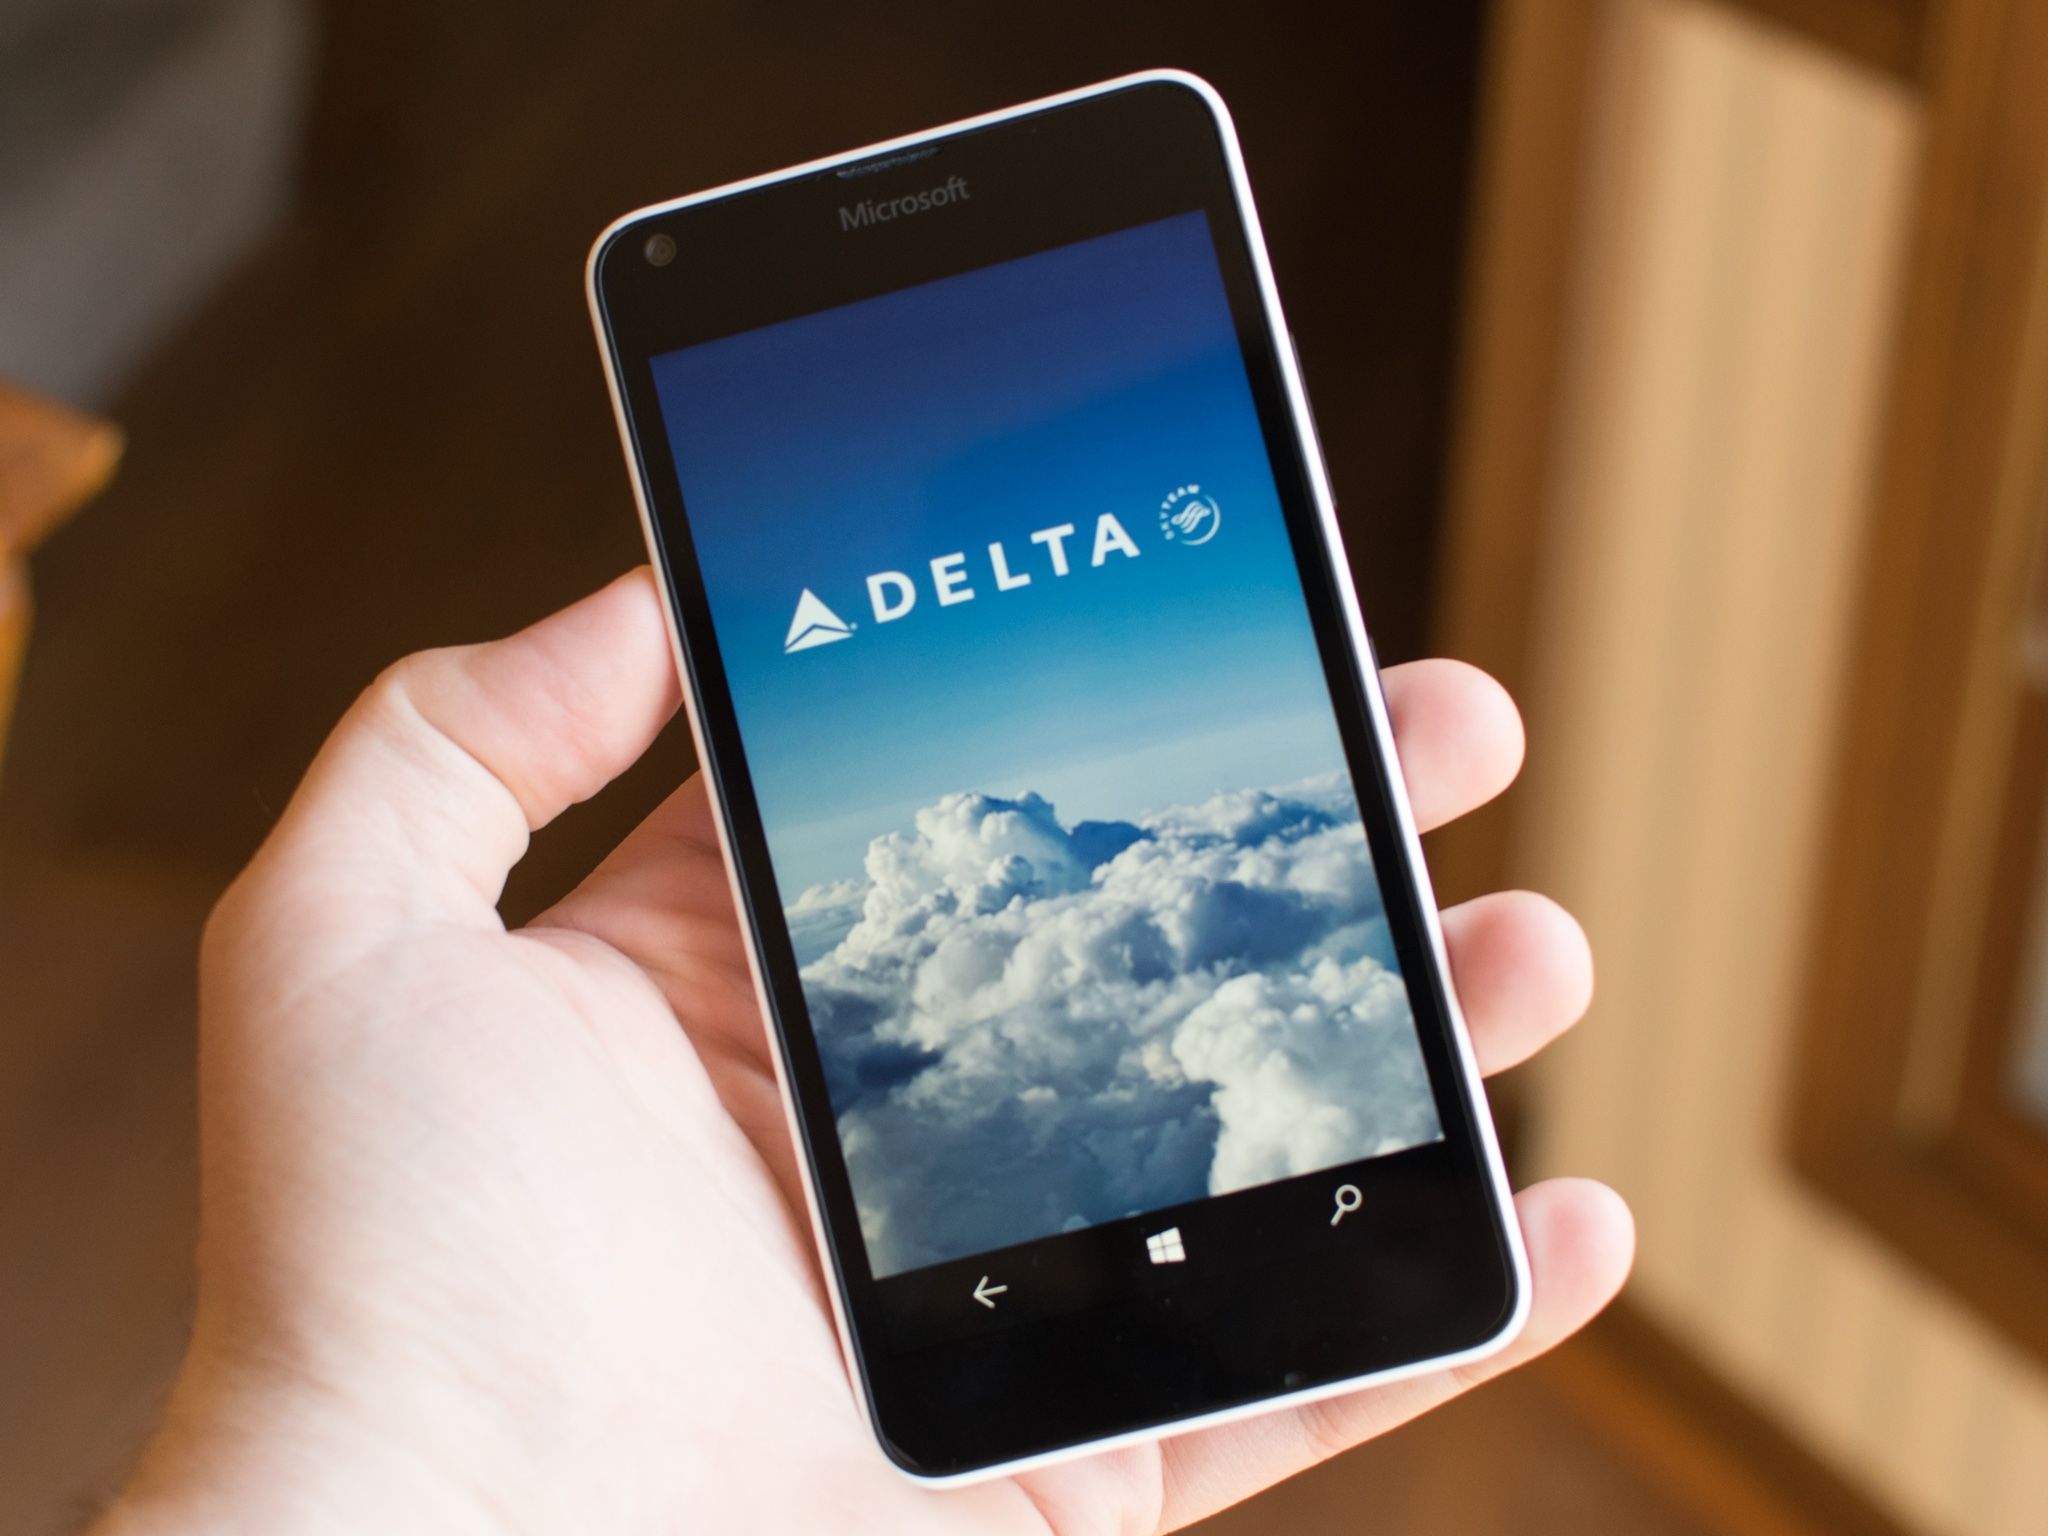 Fly Delta for Windows Phone